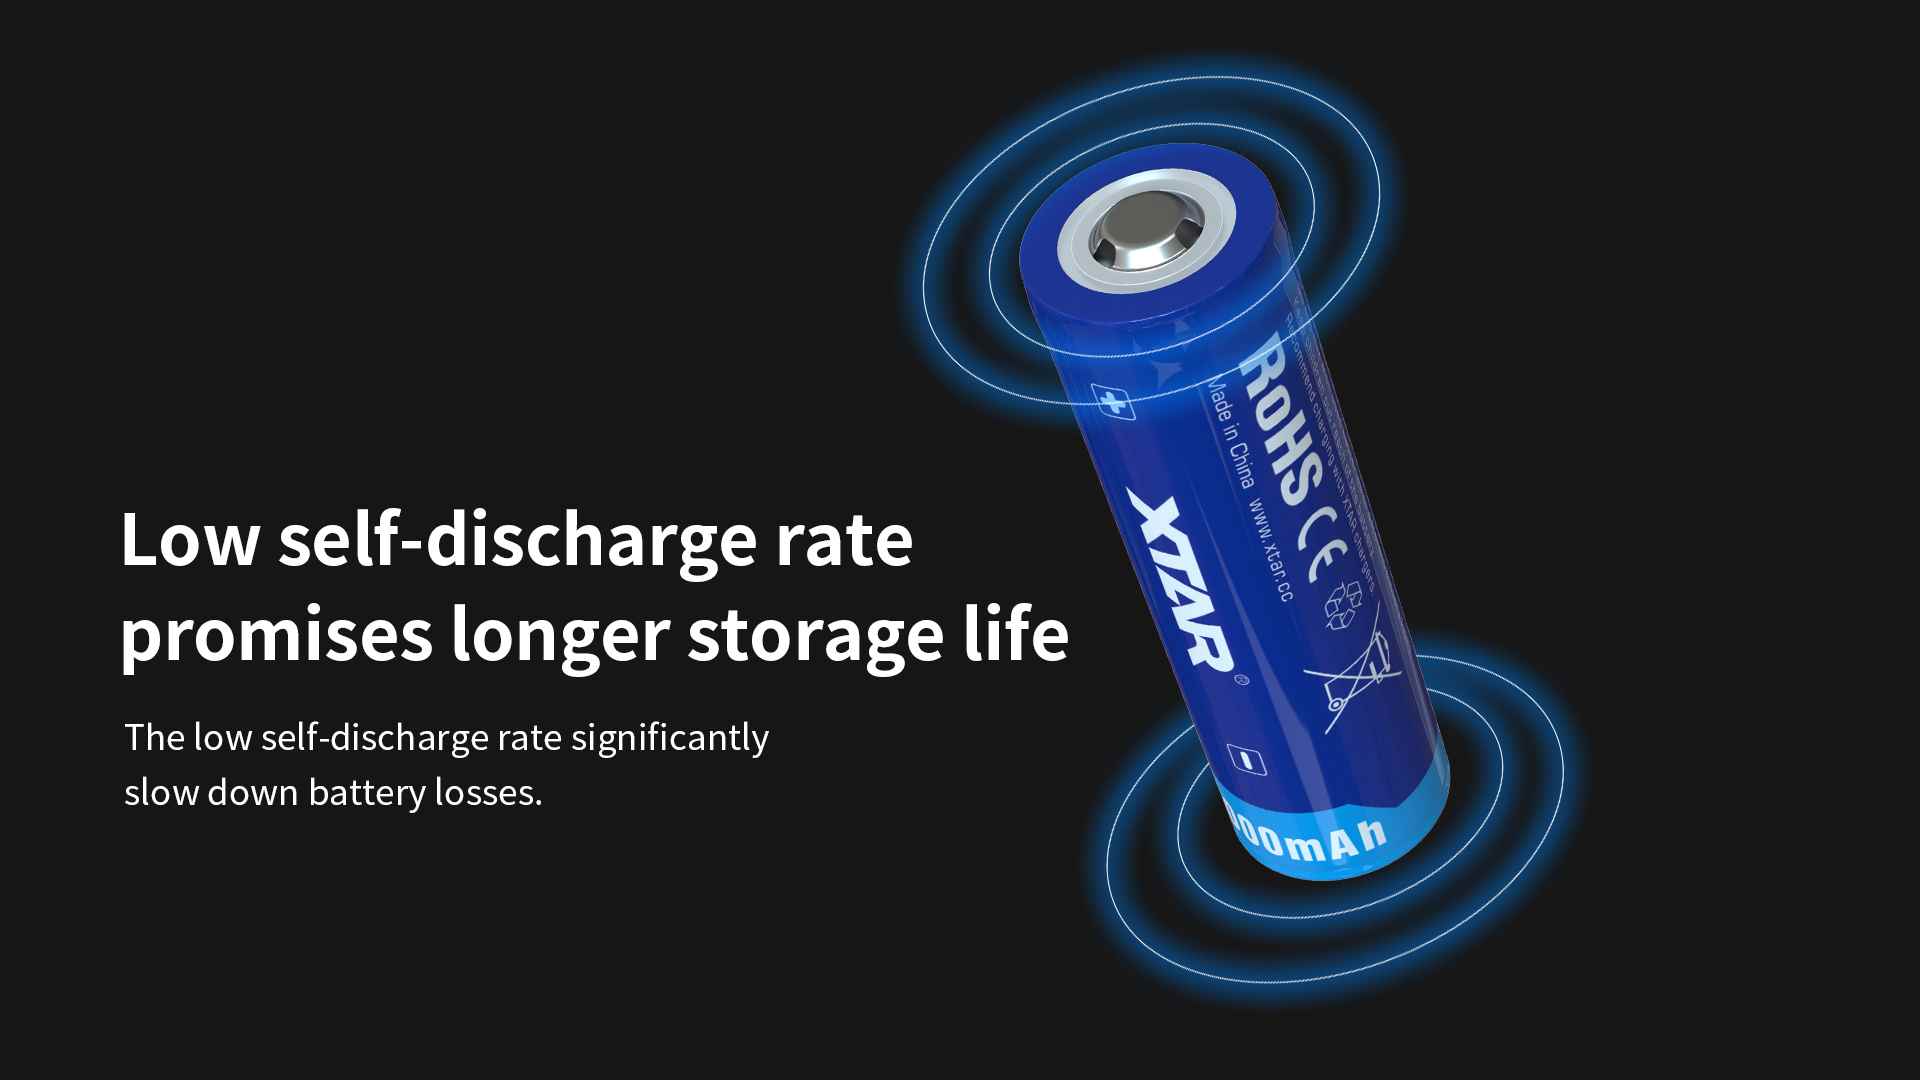 The low self-dischage rate significantly slow down battery losses.